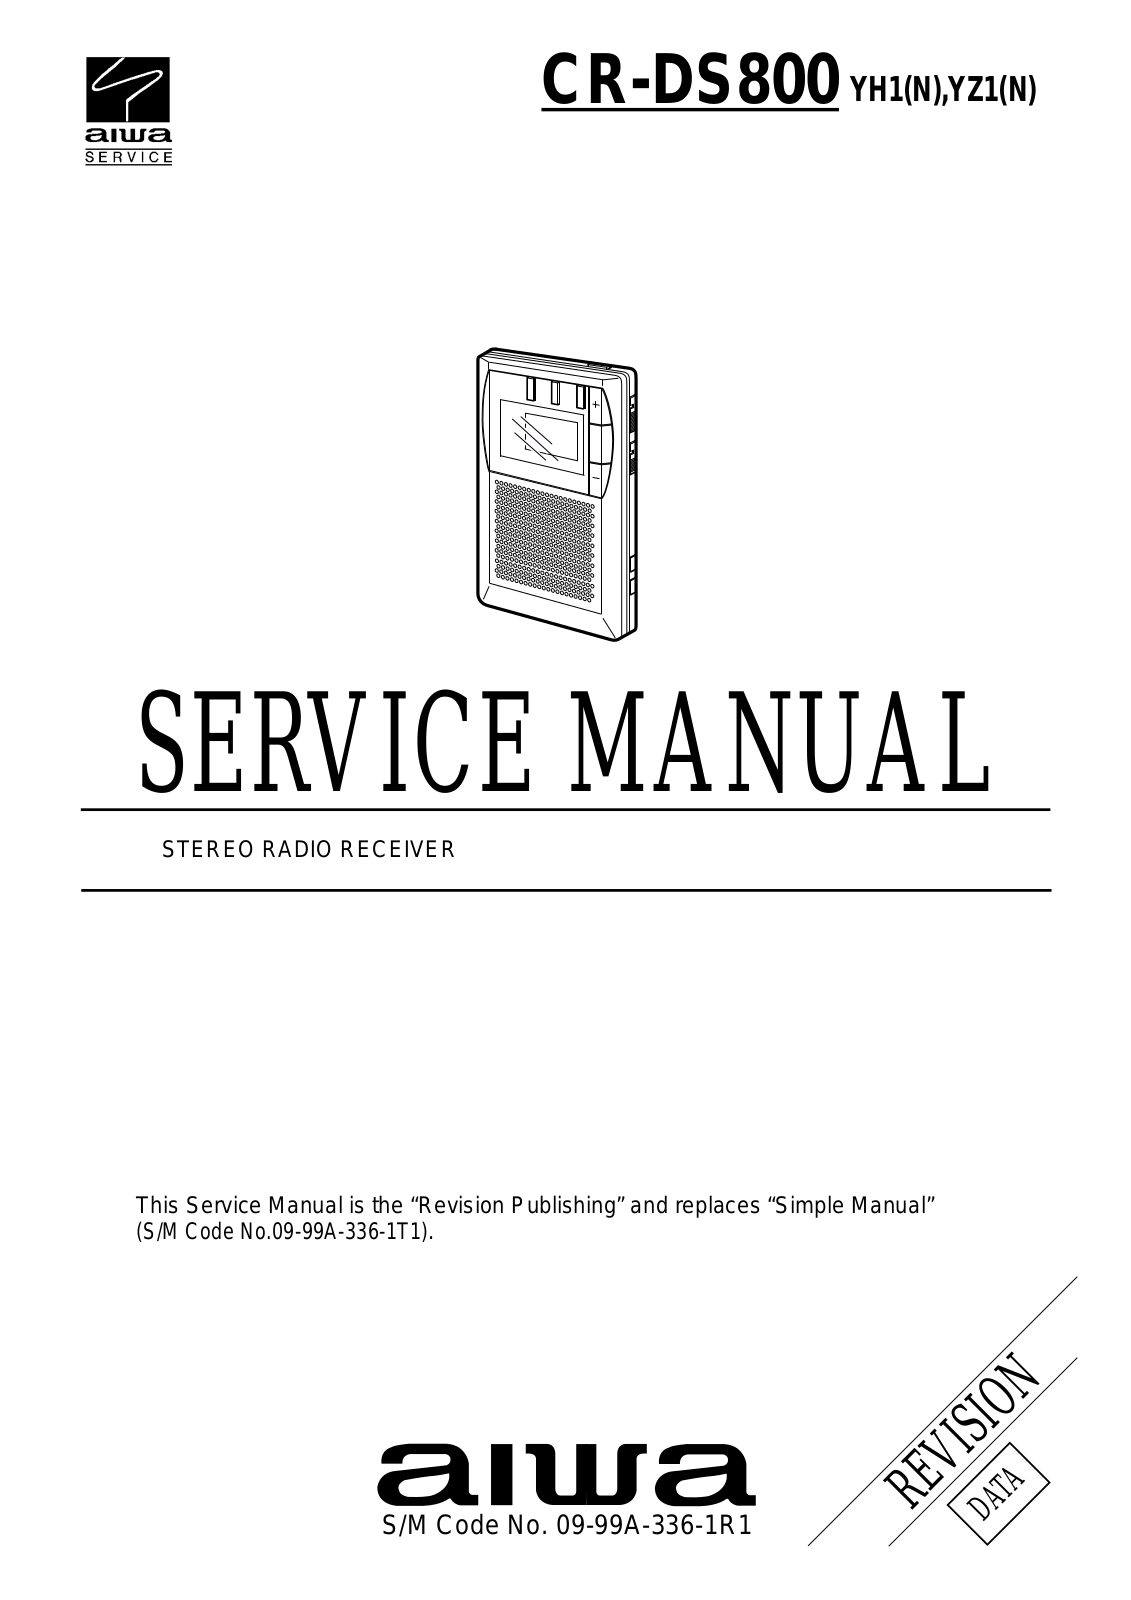 Aiwa CR-DS800 YZ1, CR-DS800 YH1 Service Manual